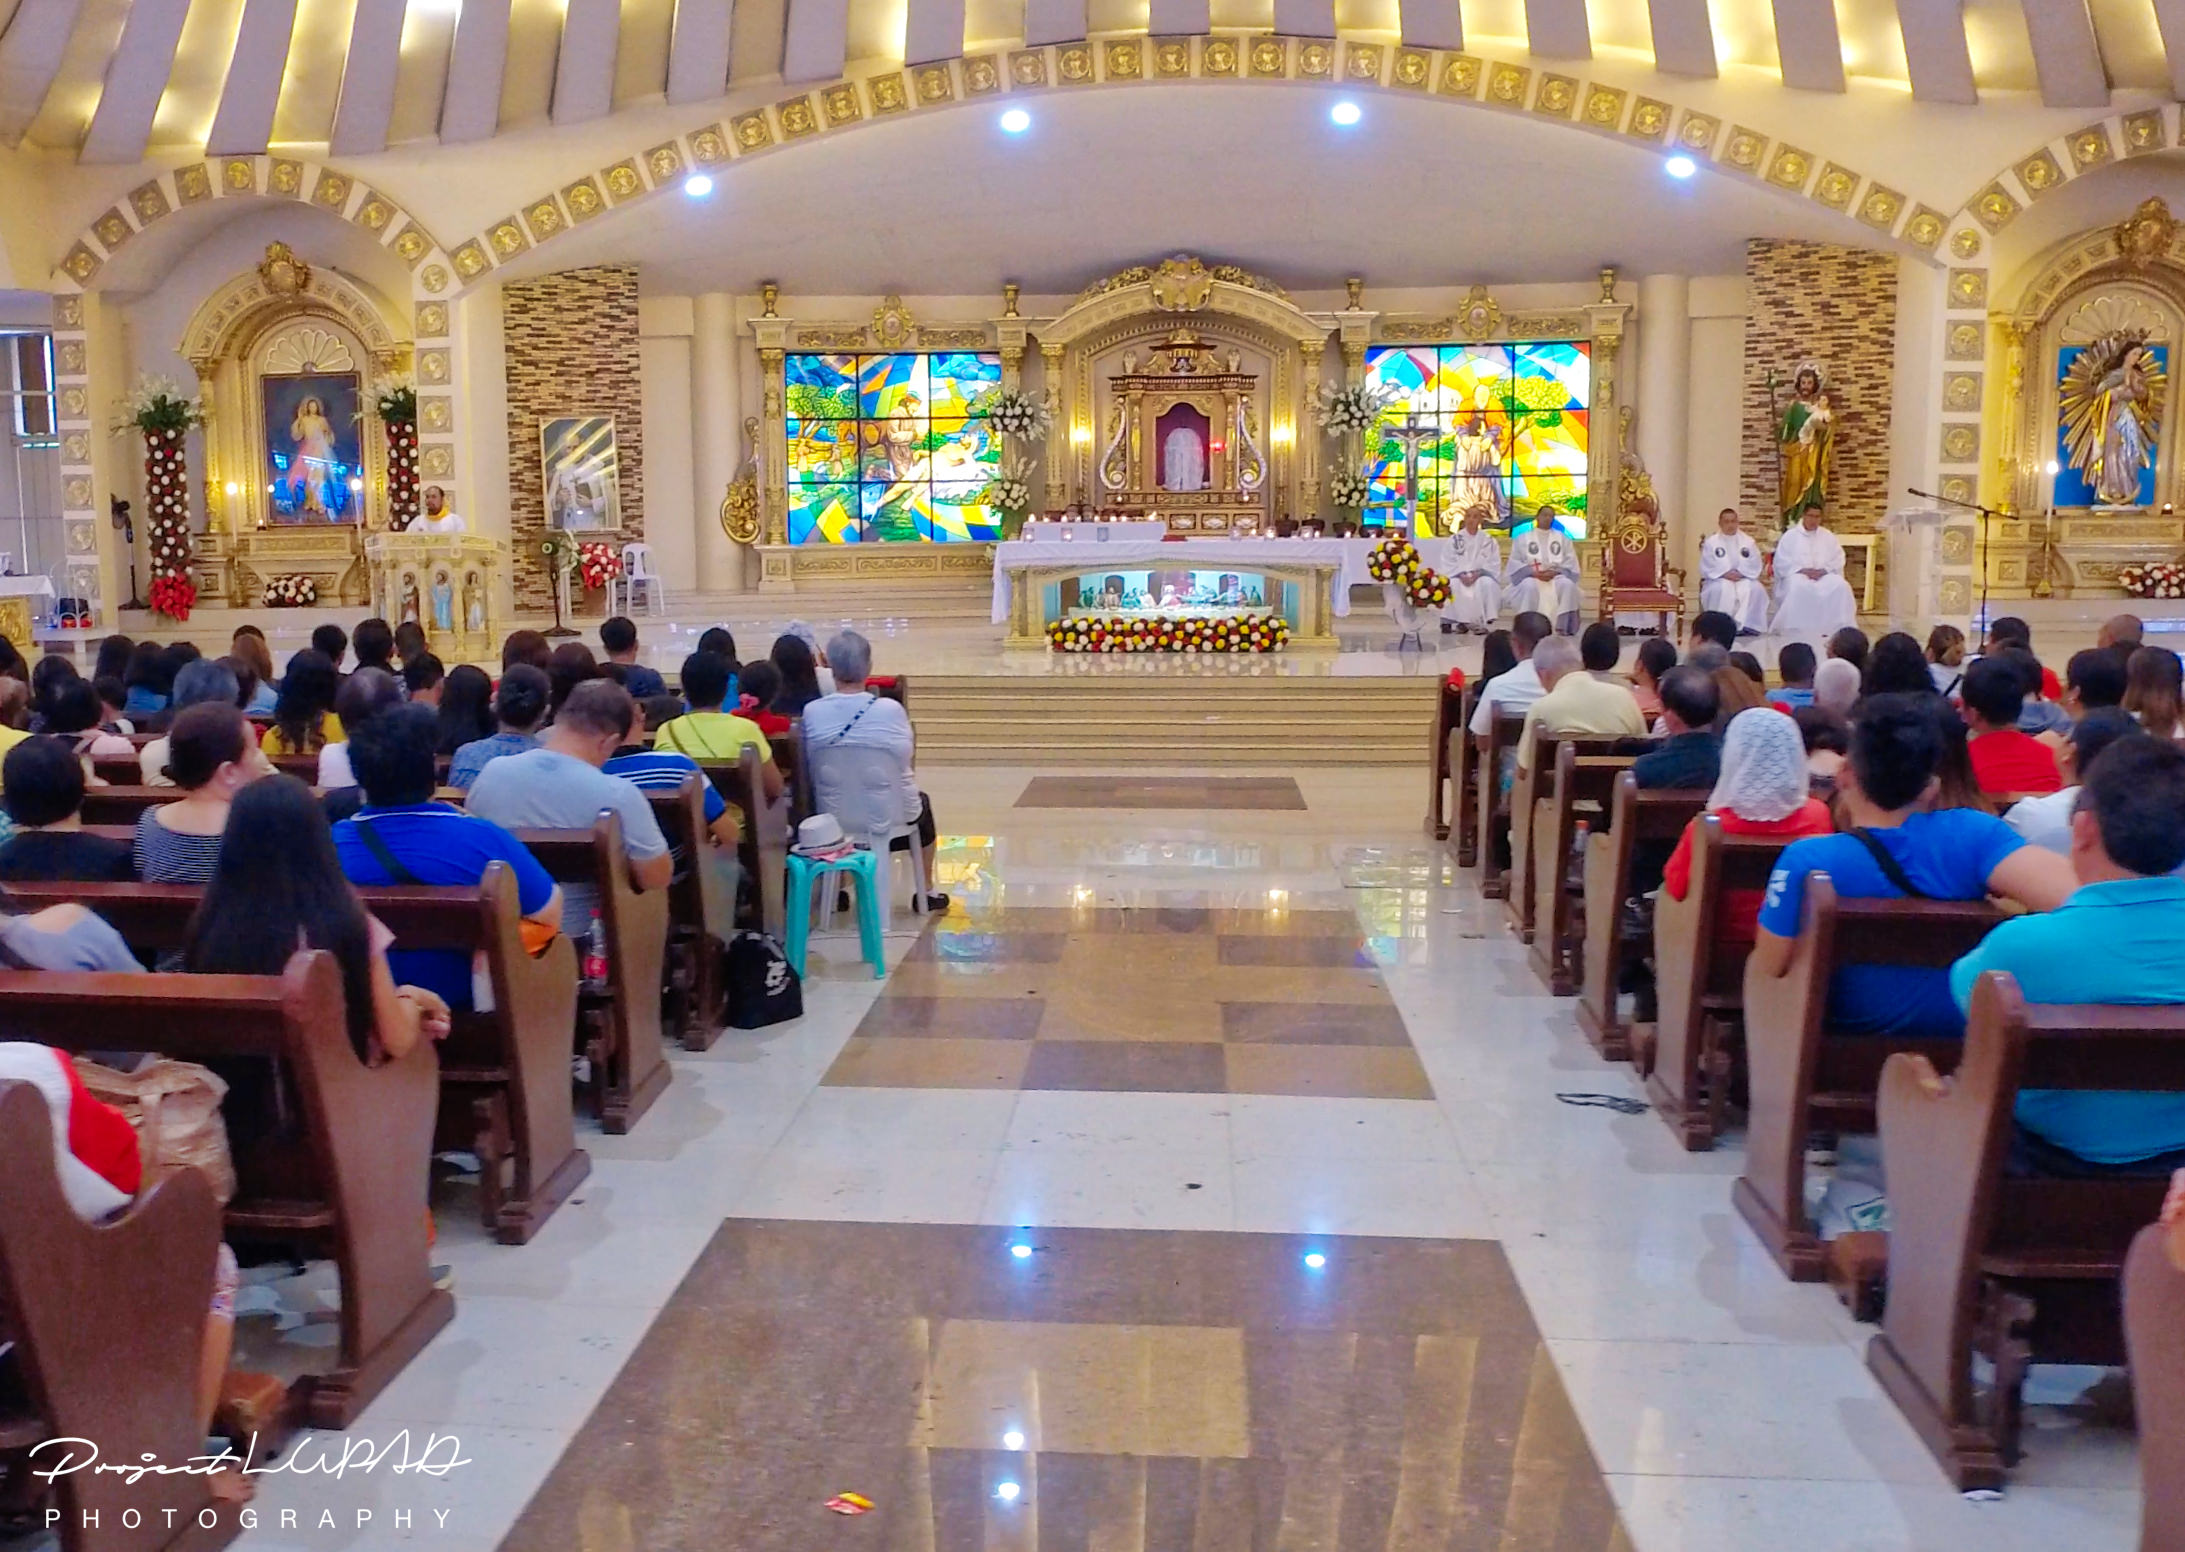 Feast of the Divine Mercy Holy Mass inside the Church throughout the day.